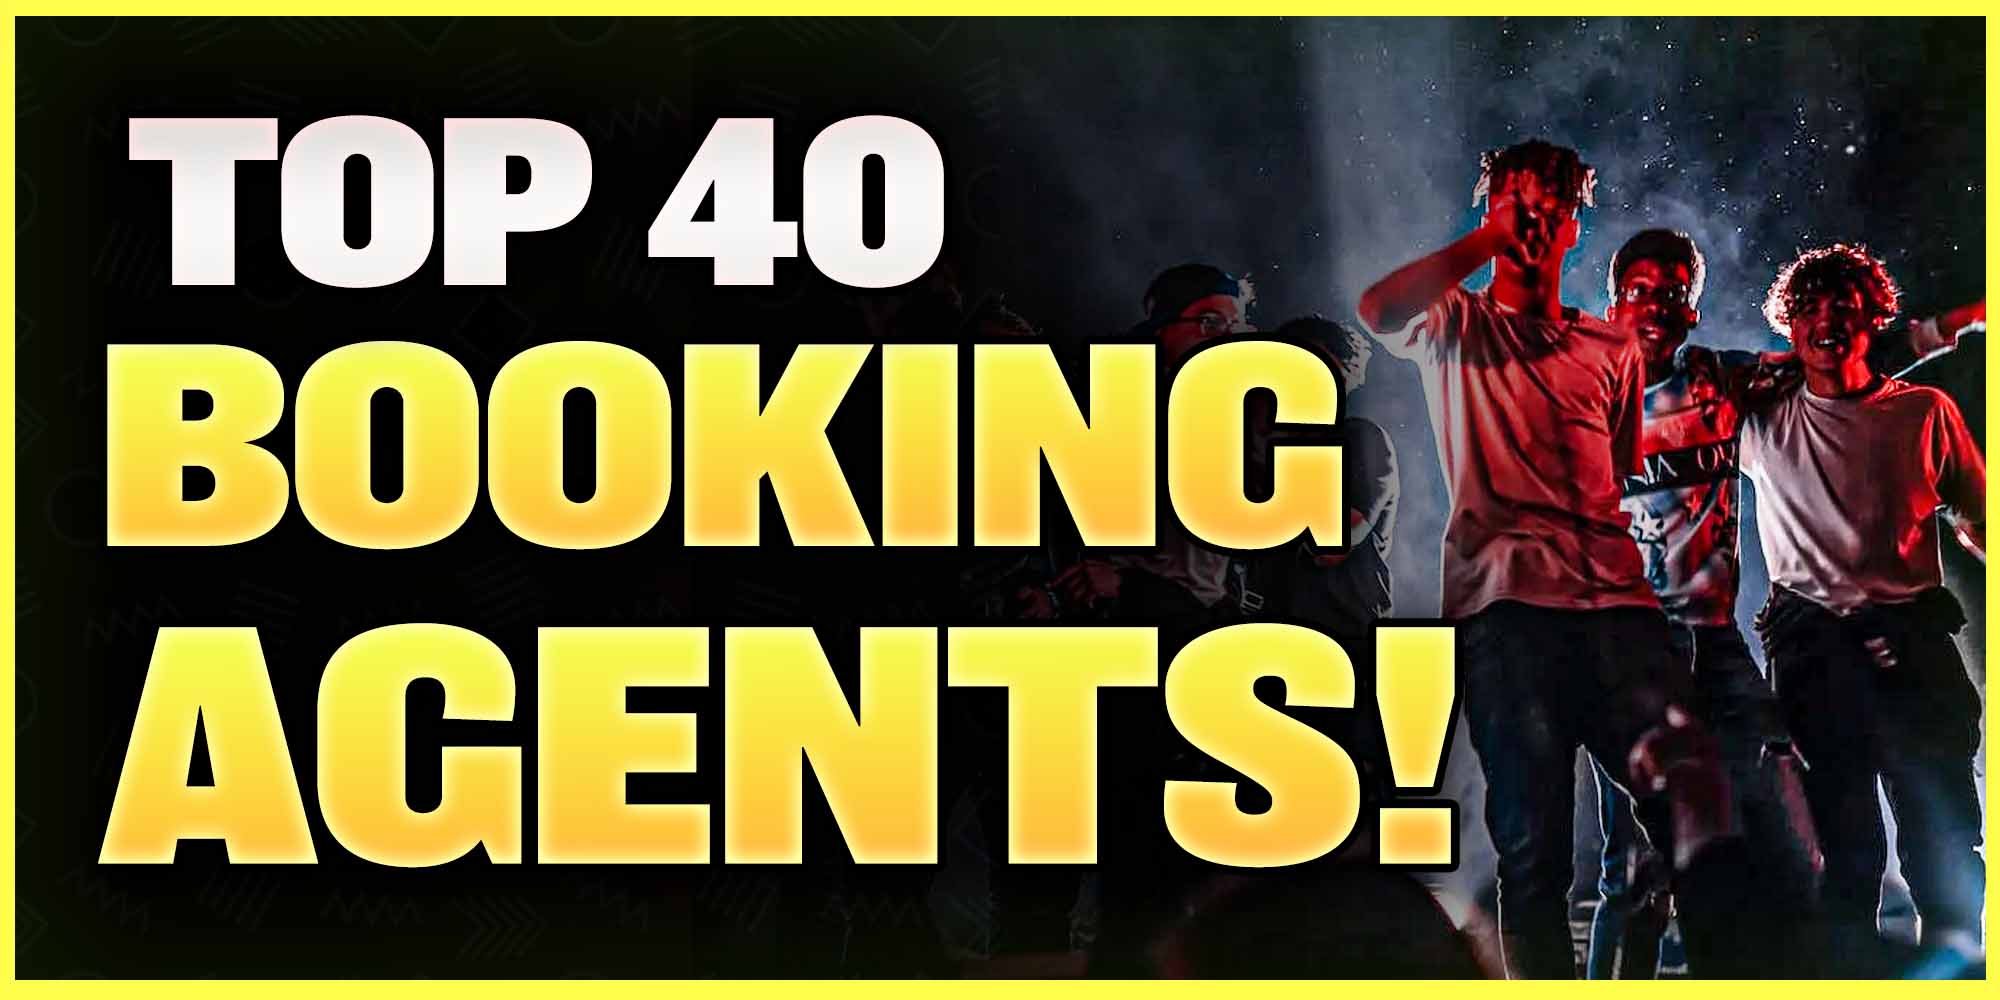 Top 40 Booking Agents